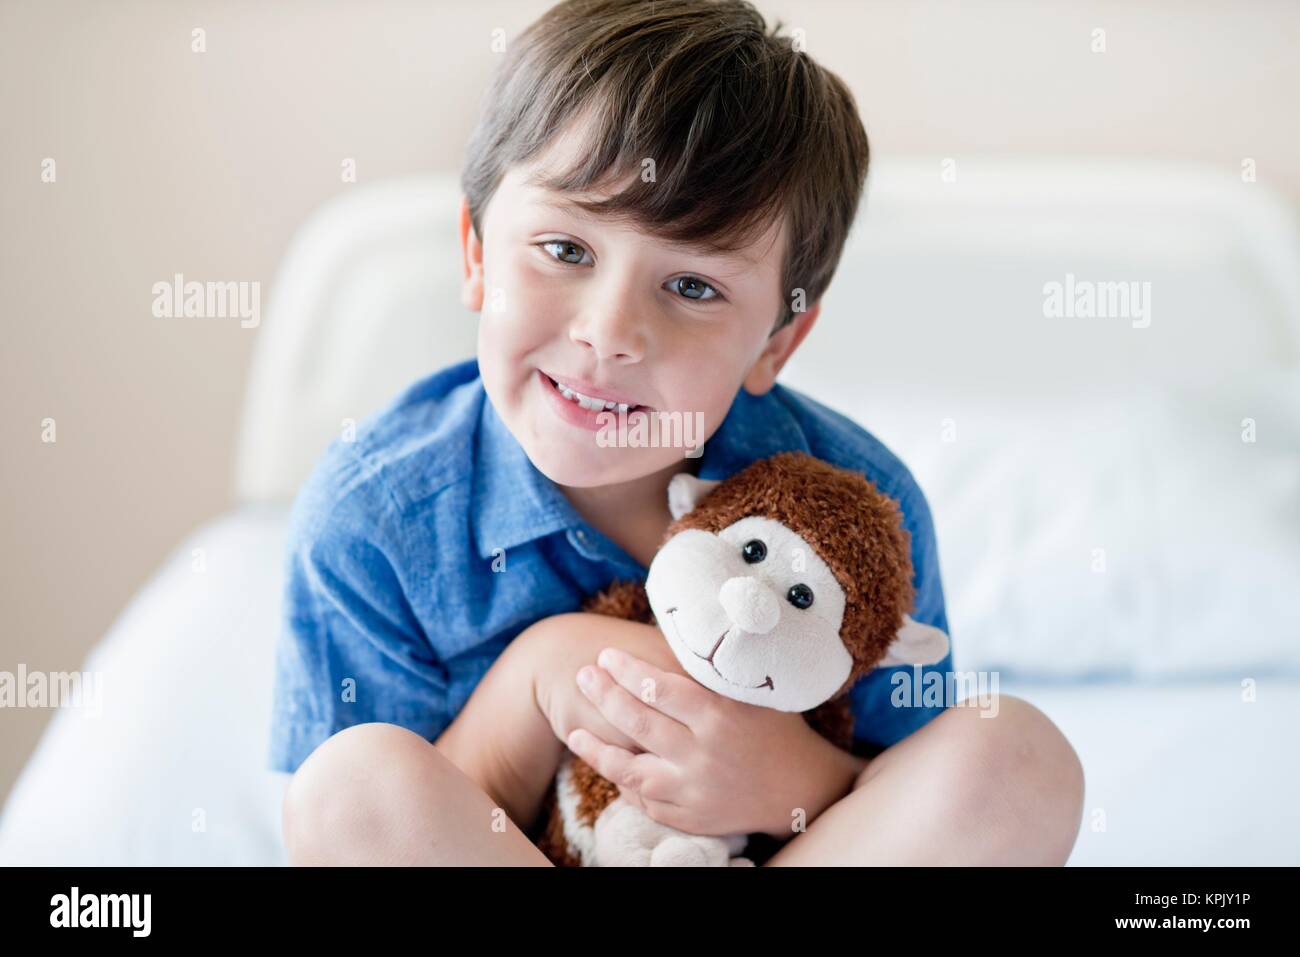 Young boy in hospital with teddy bear. Stock Photo